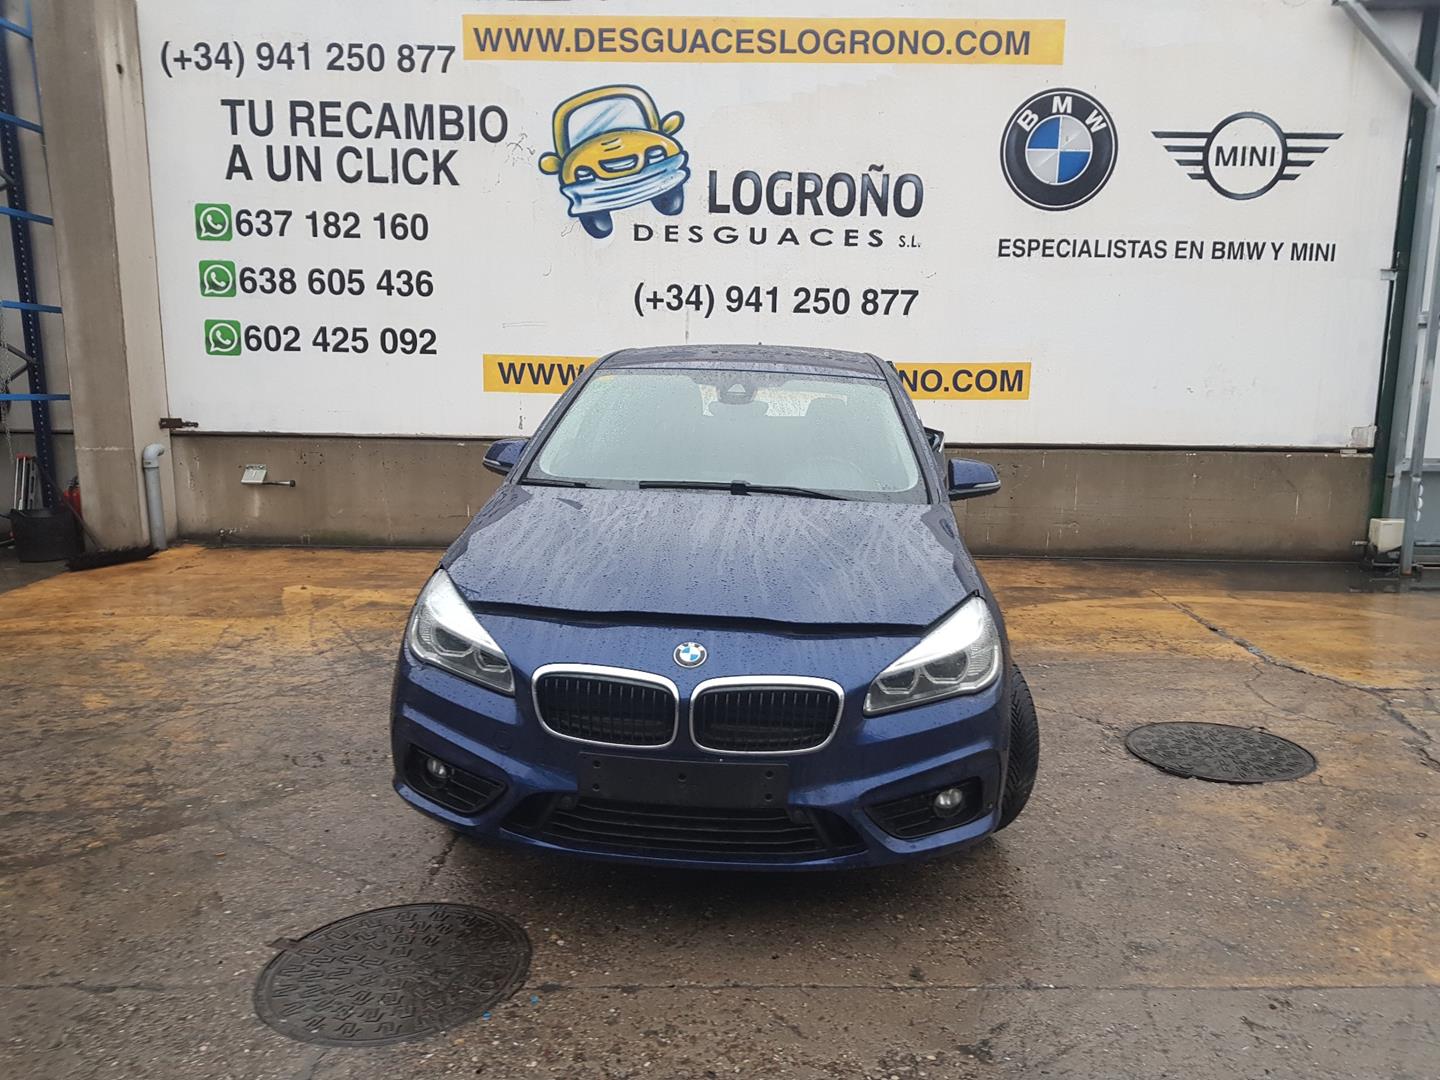 BMW 2 Series Active Tourer F45 (2014-2018) Other Engine Compartment Parts 13718570016, 8570016 24155032